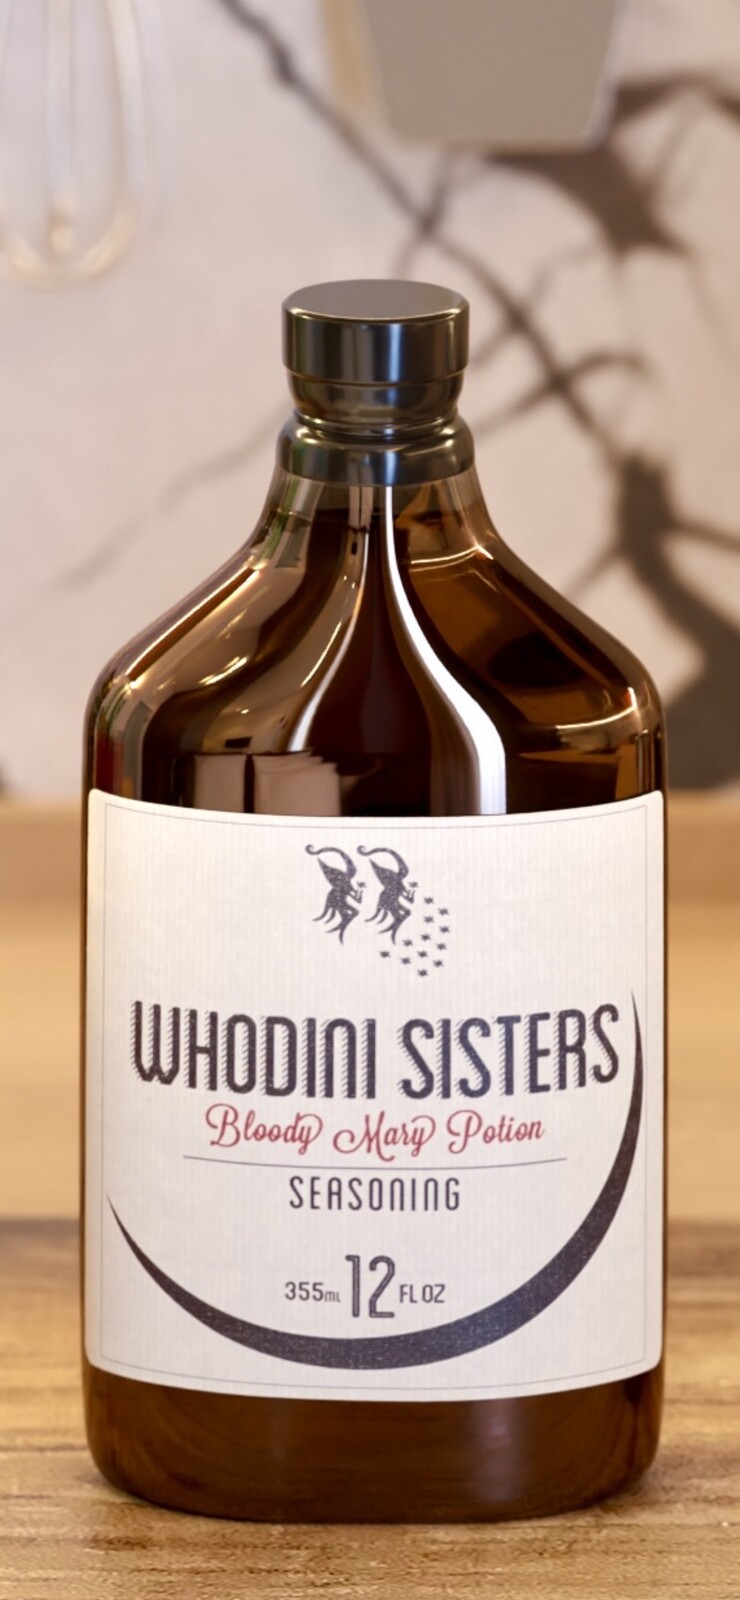 Whodini Sisters: Bloody Mary Potion